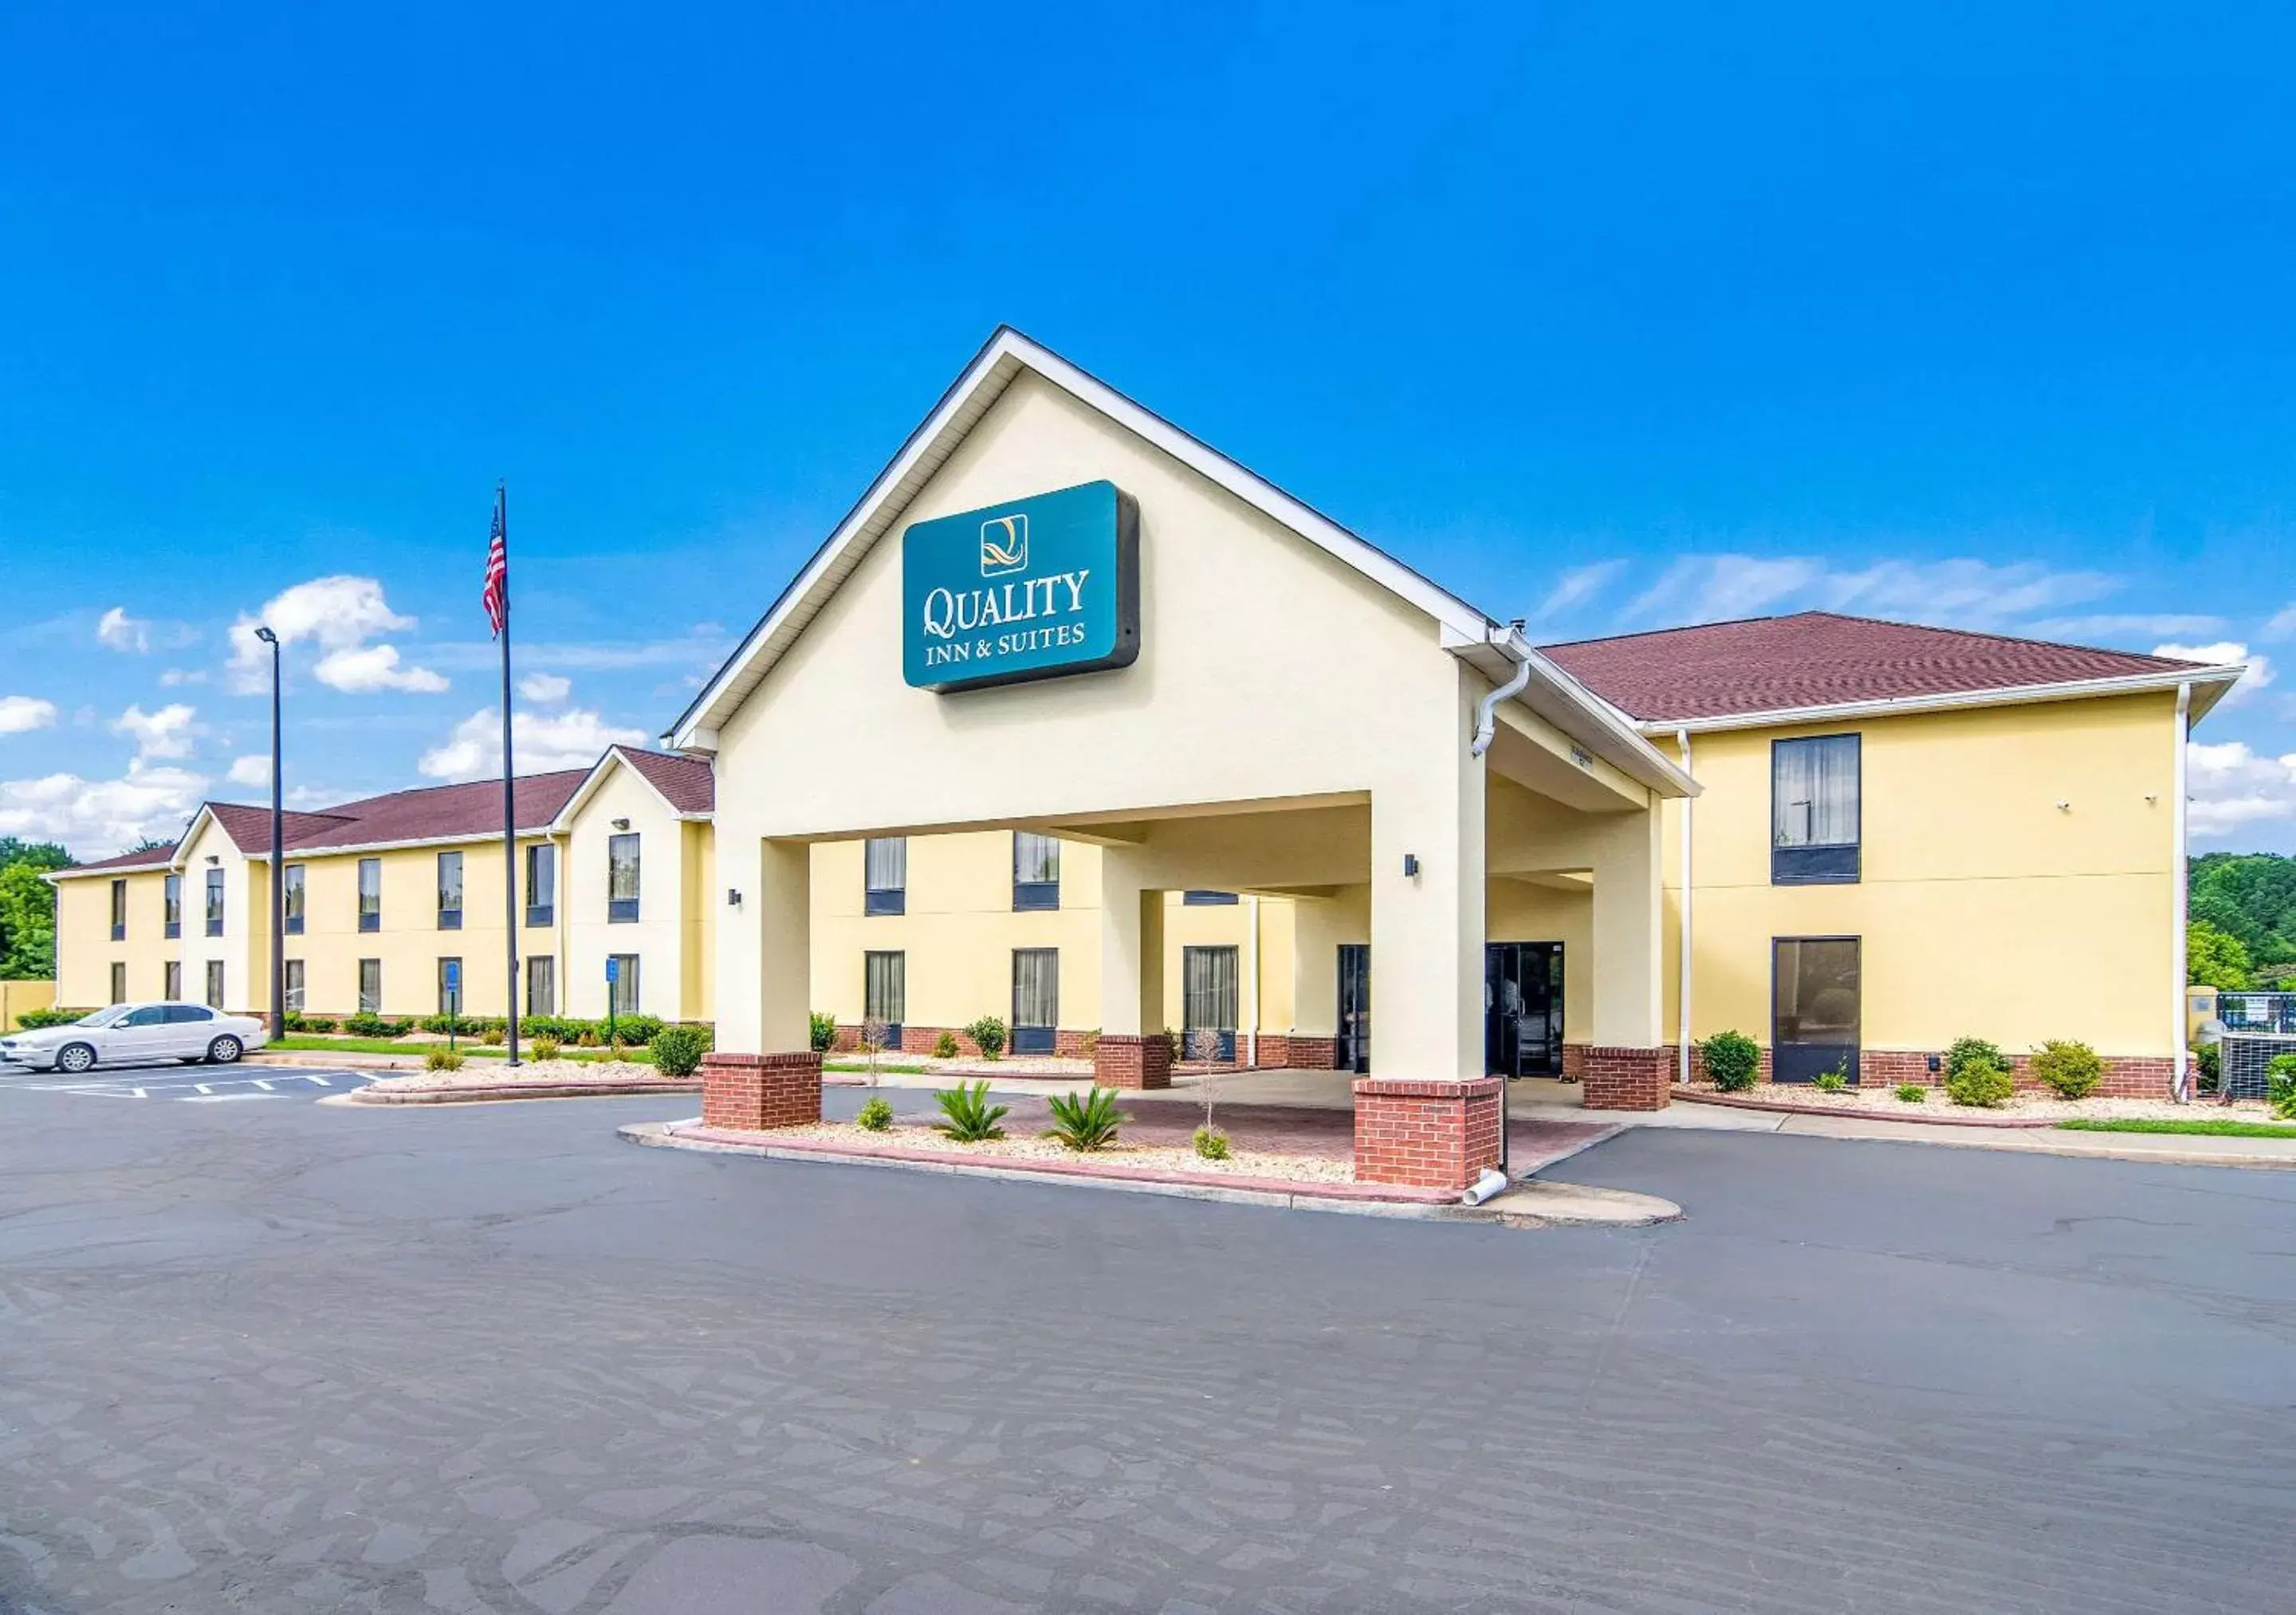 Property building in Quality Inn & Suites Canton, GA